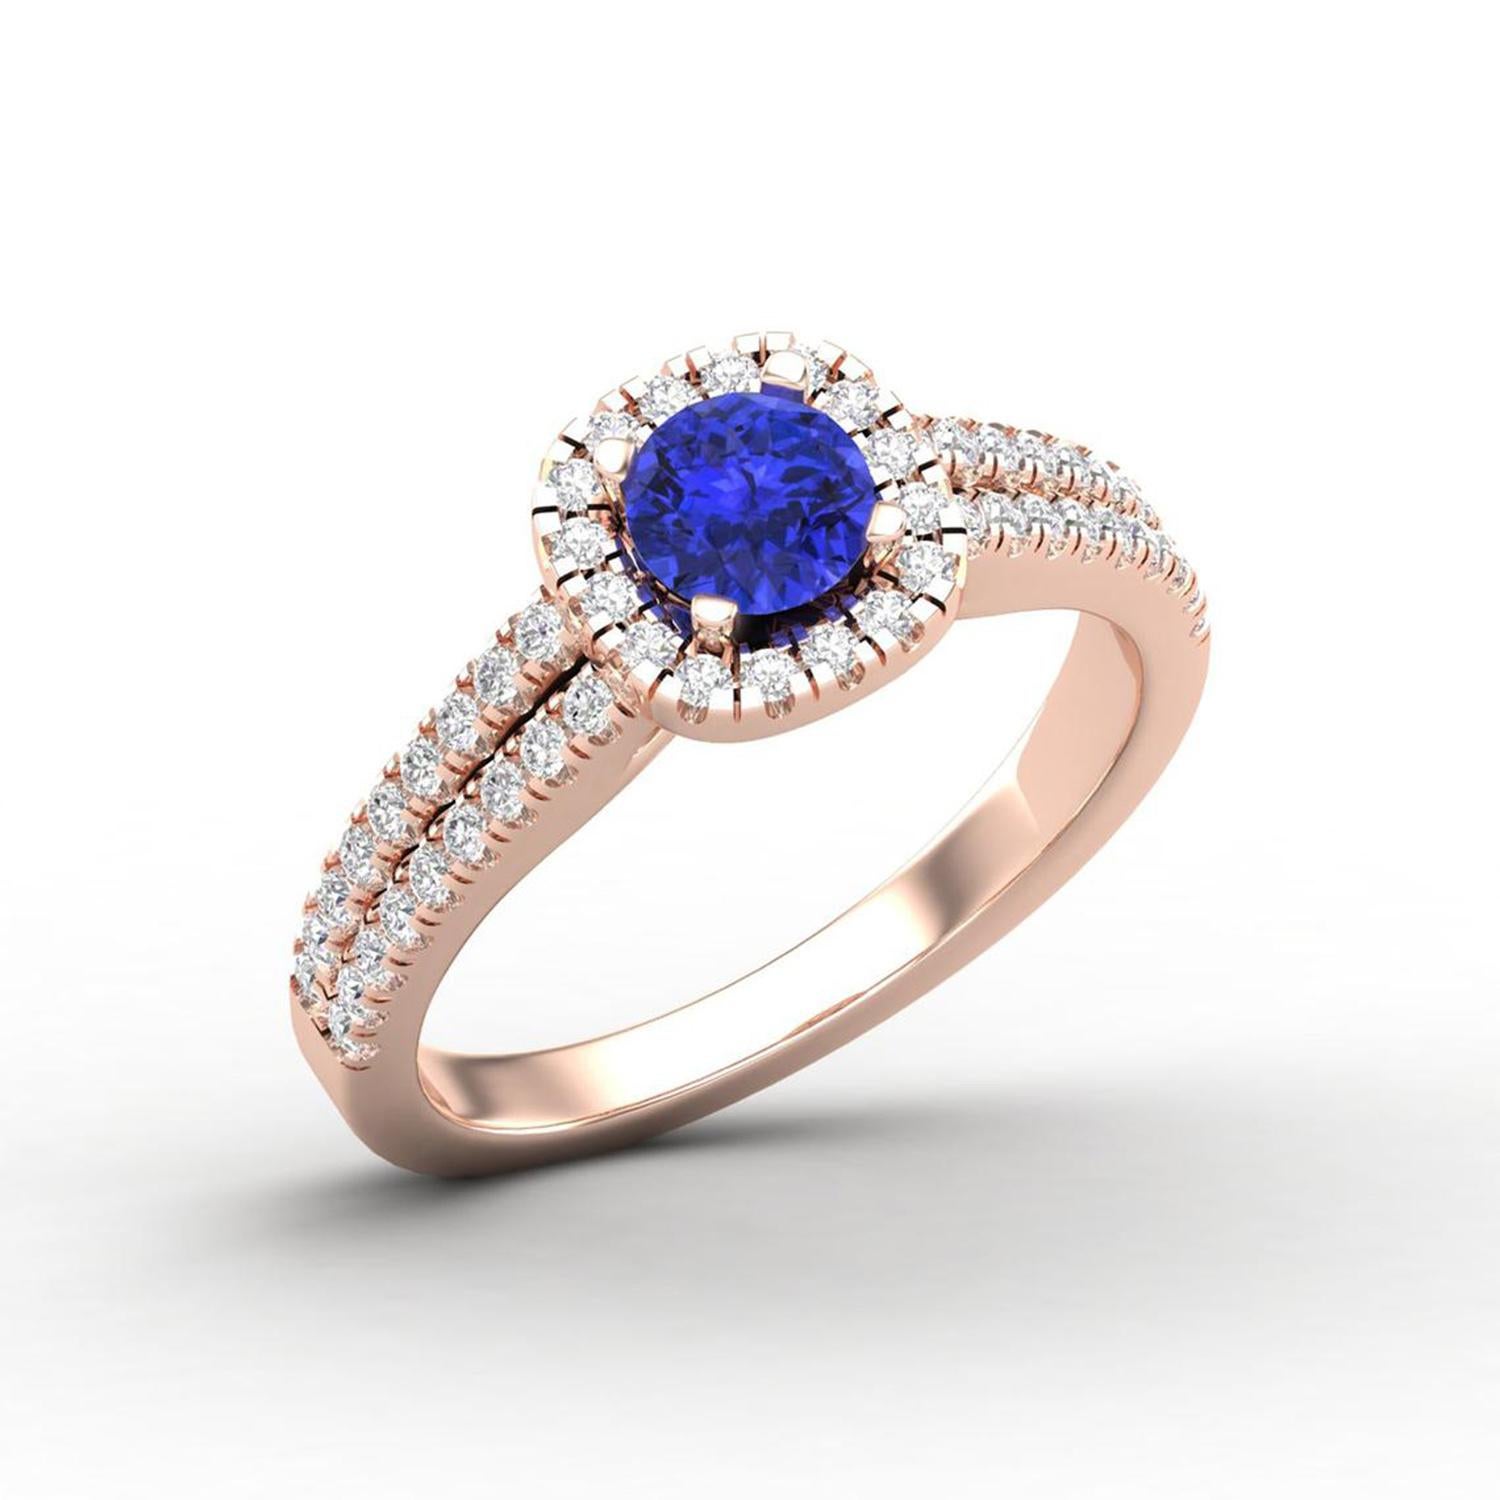 Women's 14 K Gold Tanzanite Ring / Diamond Solitaire Ring / Ring for Her For Sale